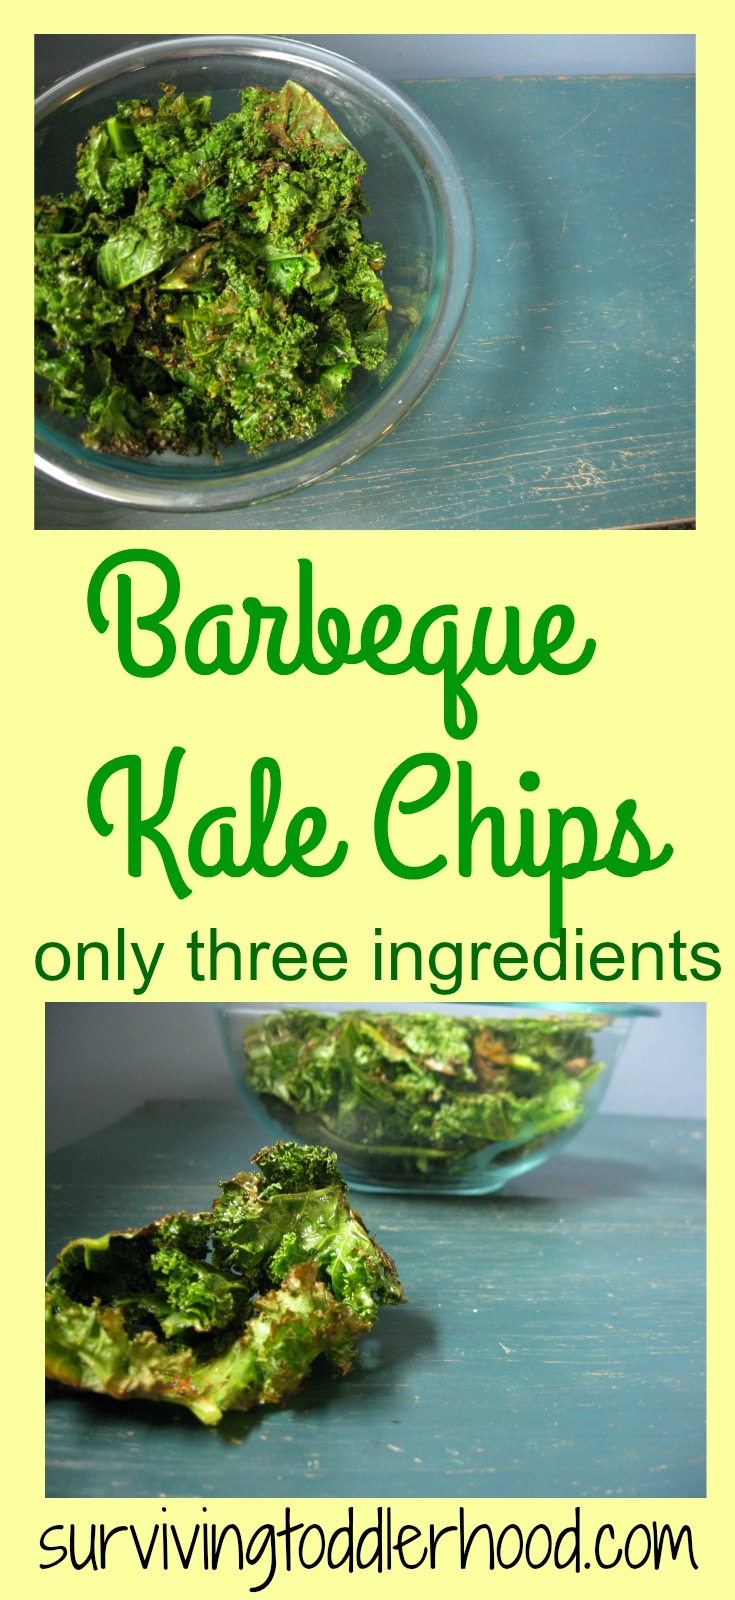 Barbeque Kale Chips. You only need three ingredients to make this new version of kale chips. It is the perfect way to use up your abundance of kale. 